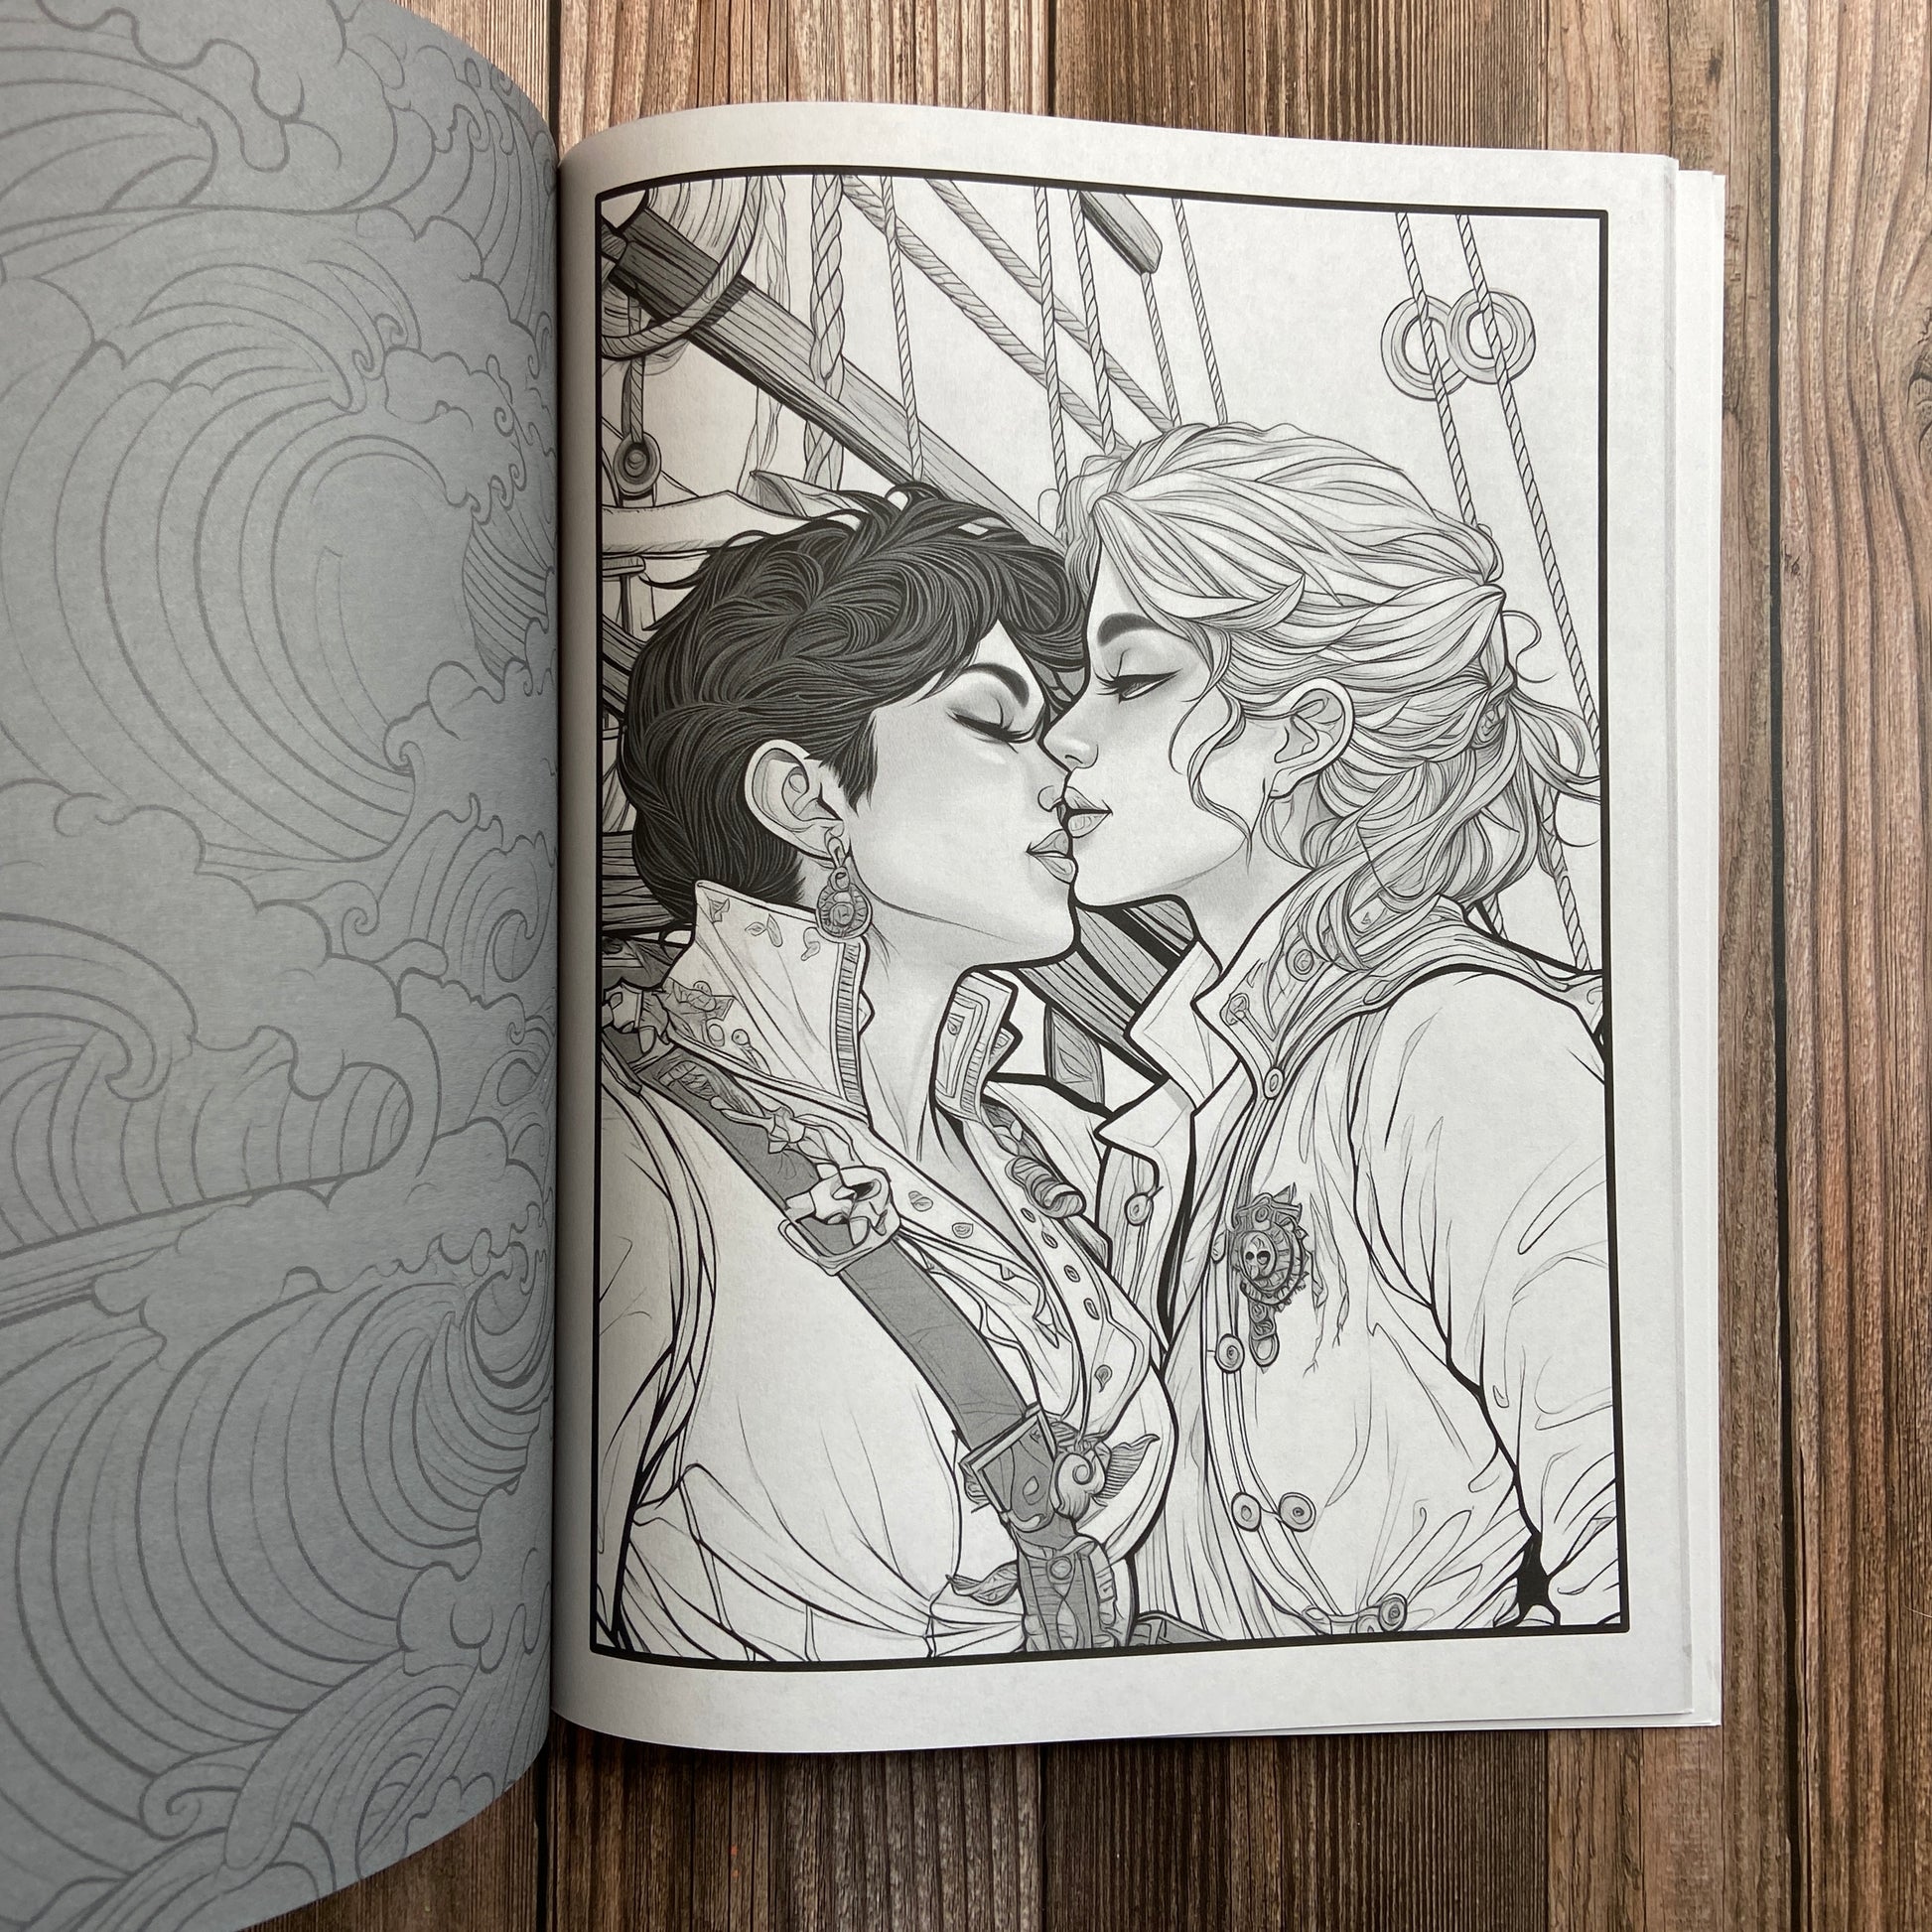 A N.C. Starshadow sapphic romance coloring book with a drawing of two people kissing.